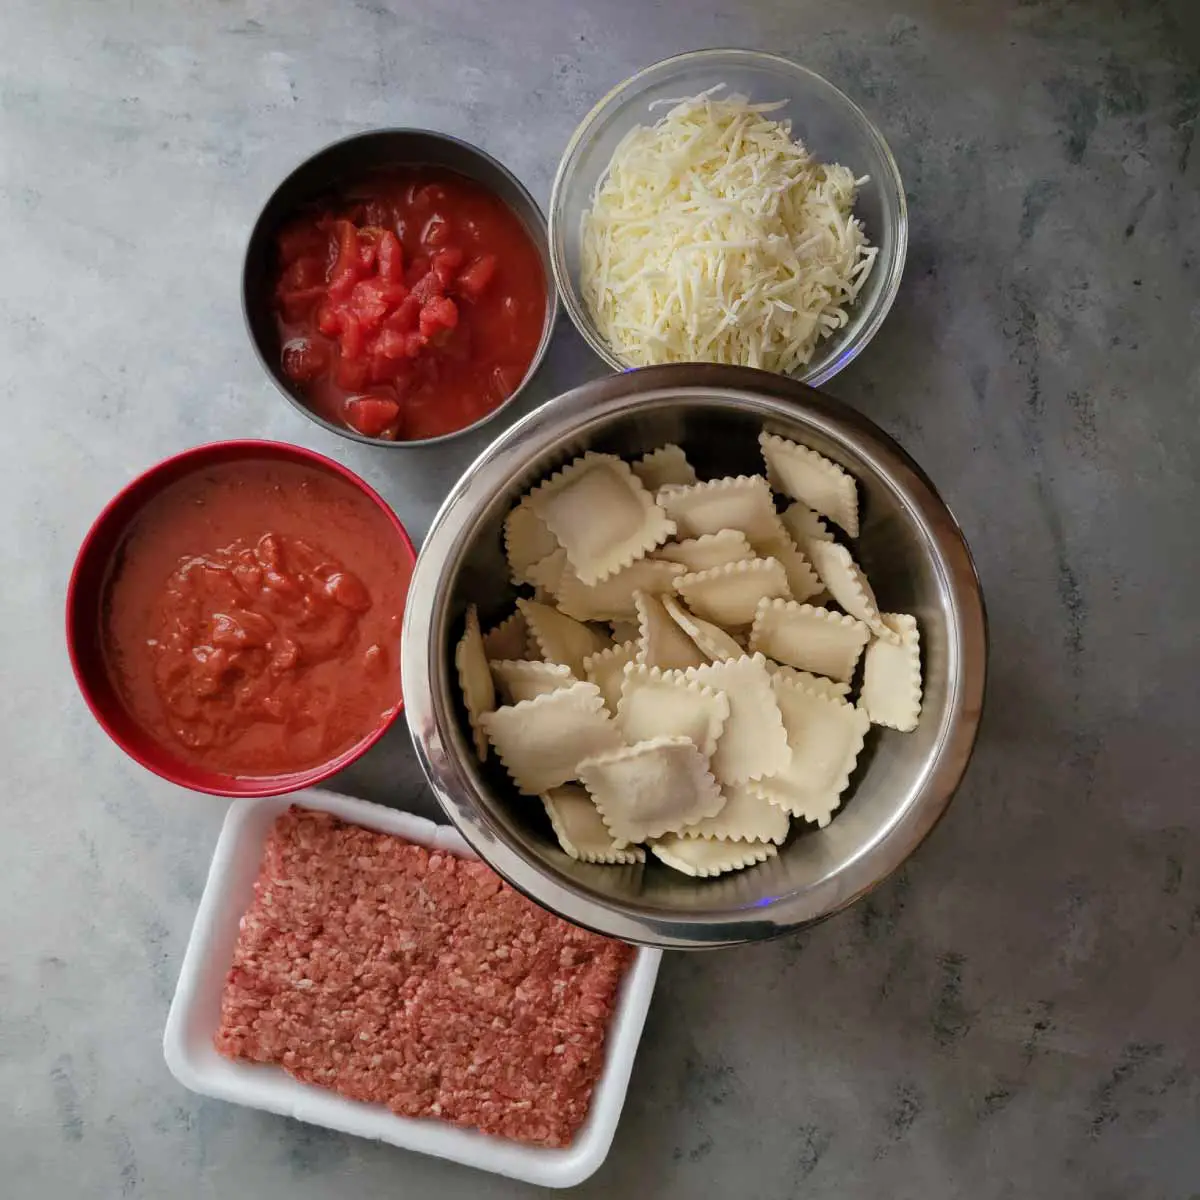 Ingredients prepped - ground sausage, frozen raviolis, marinara sauce, cheese and diced tomatoes.